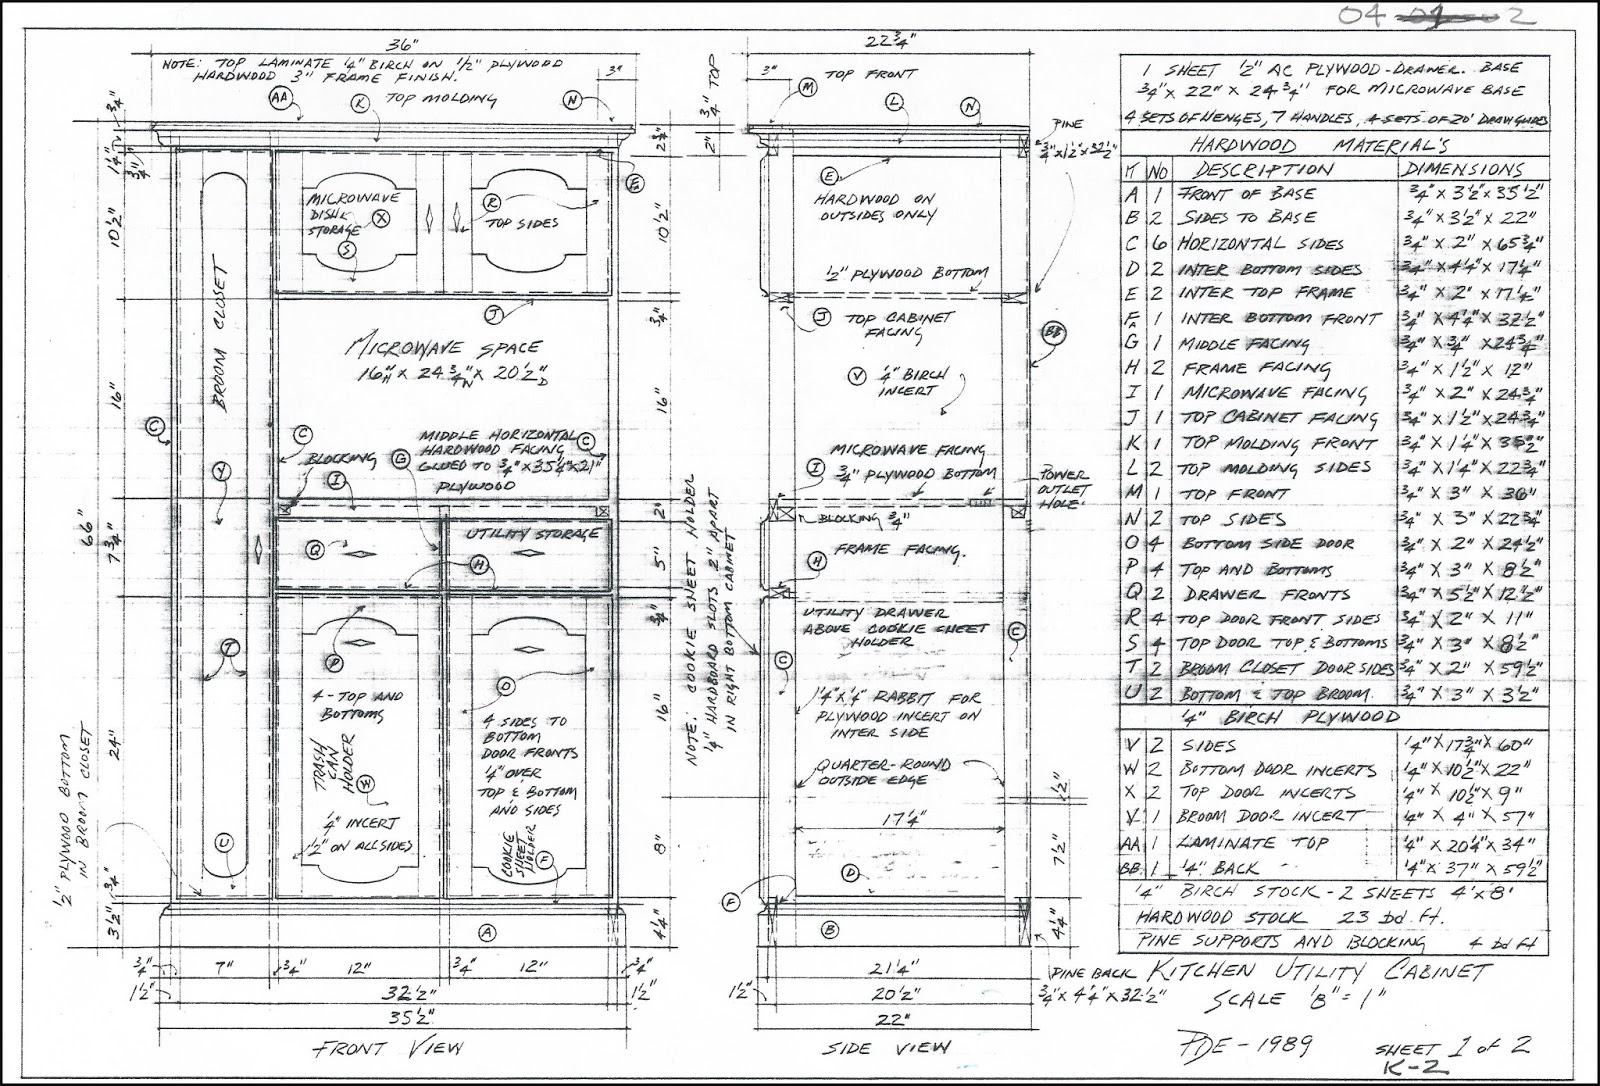 15 Kitchen Cabinet Shop Drawings Hand drawings this project Sheet  Kitchen,Cabinet,Shop,Drawings